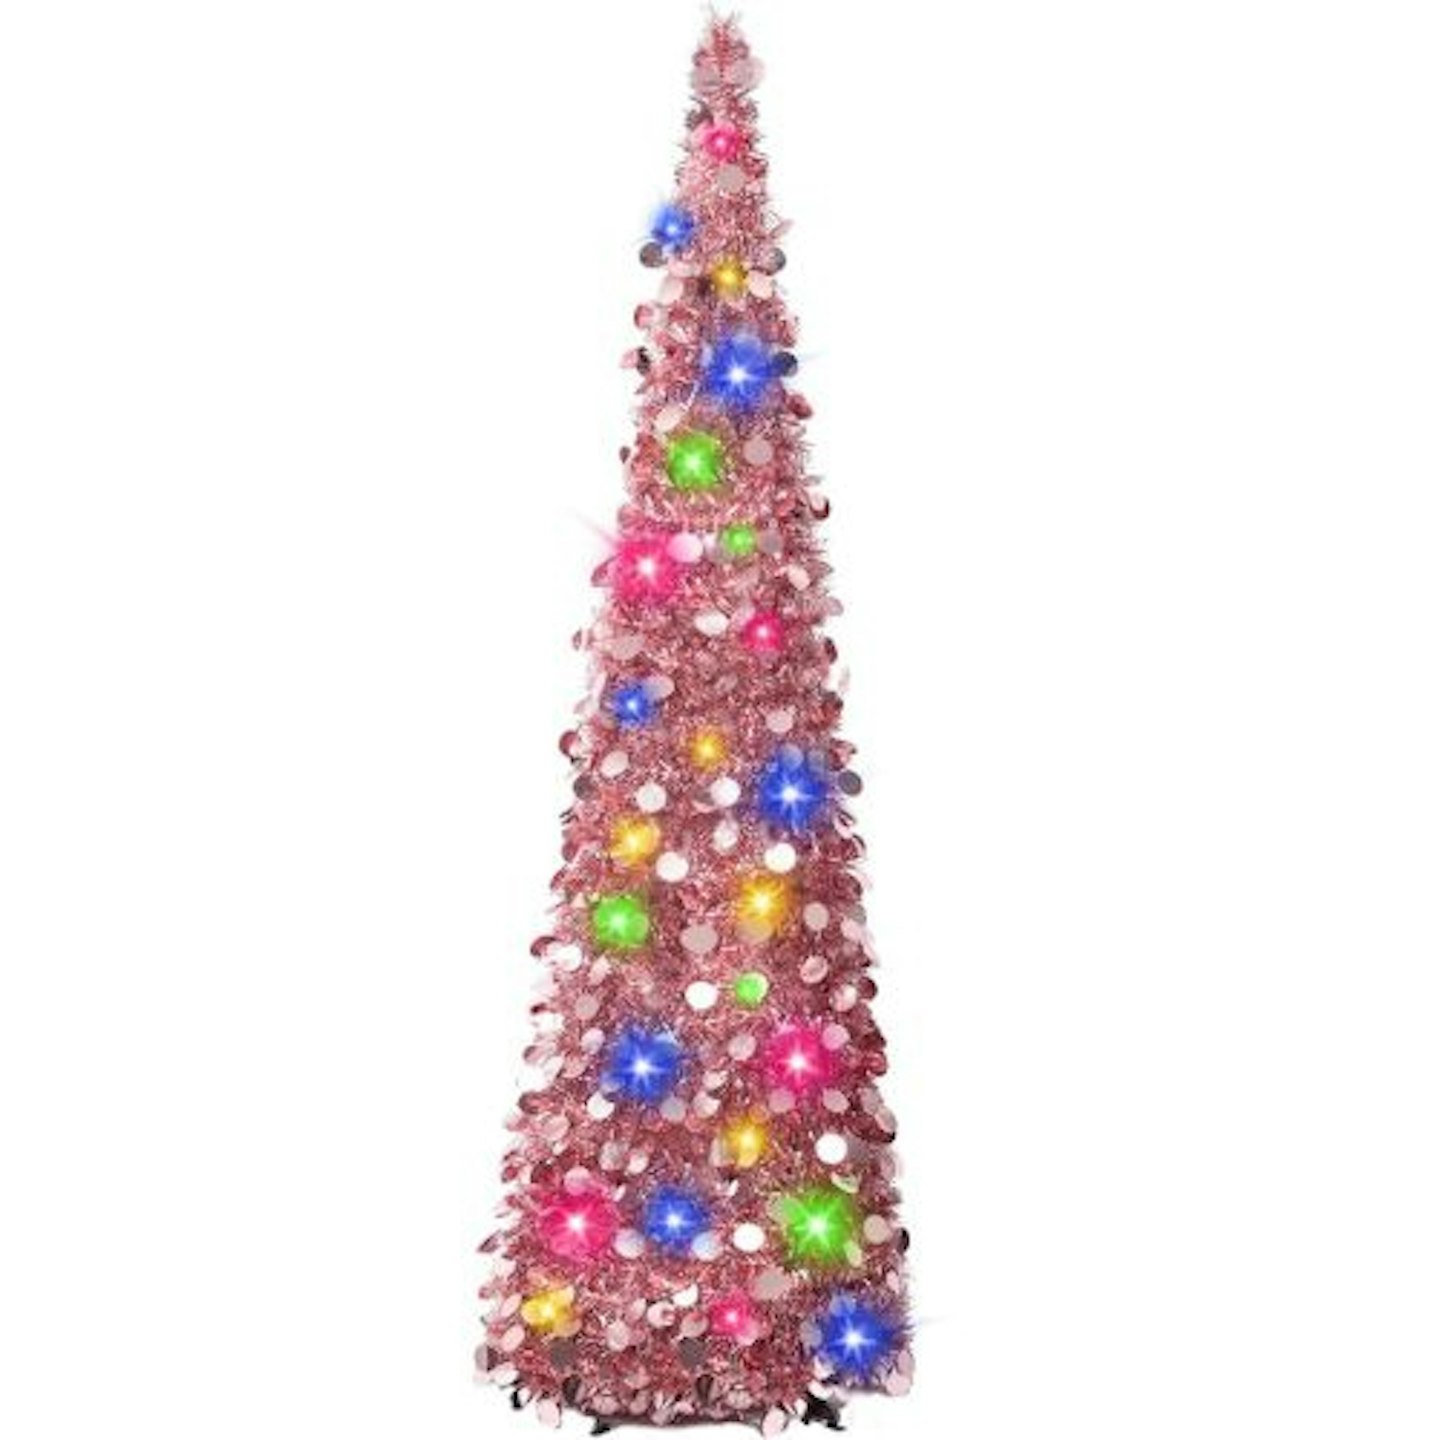 Best artificial Christmas trees Collapsible Pop Up Christmas Tree Rose Gold